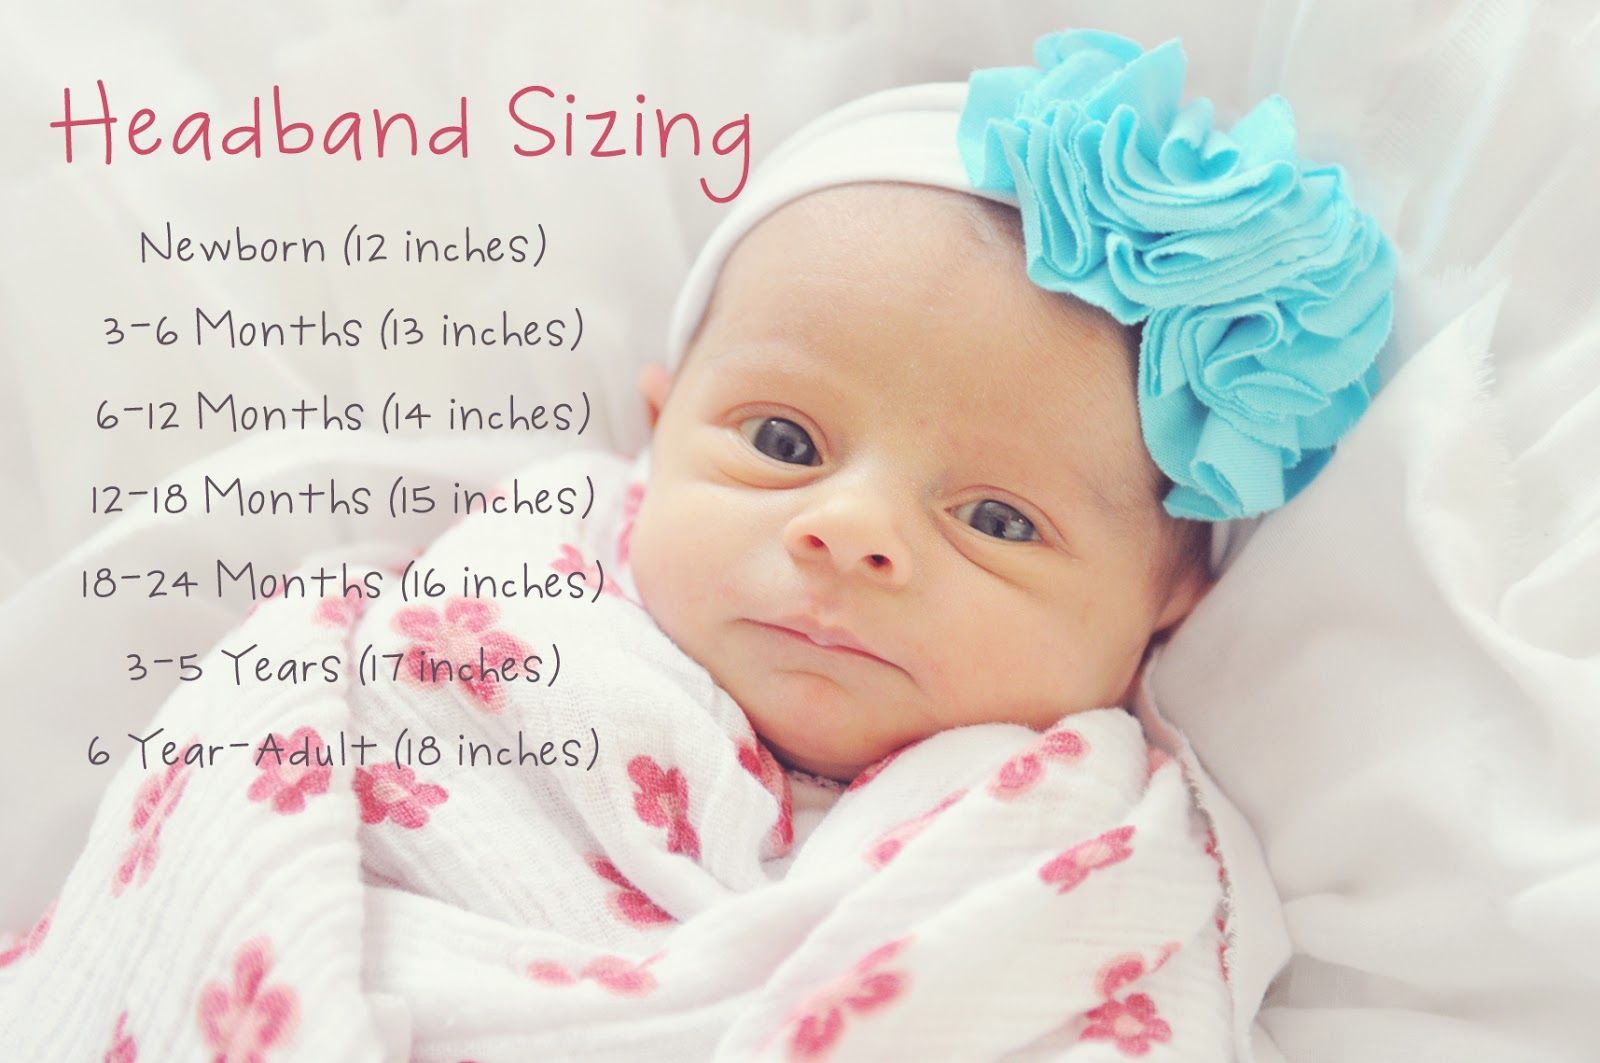 Headband sizing for DIYers – HOW HANDY!! This was from Meredith Rowleys blog which was VERY entertaining! A photographer mom with